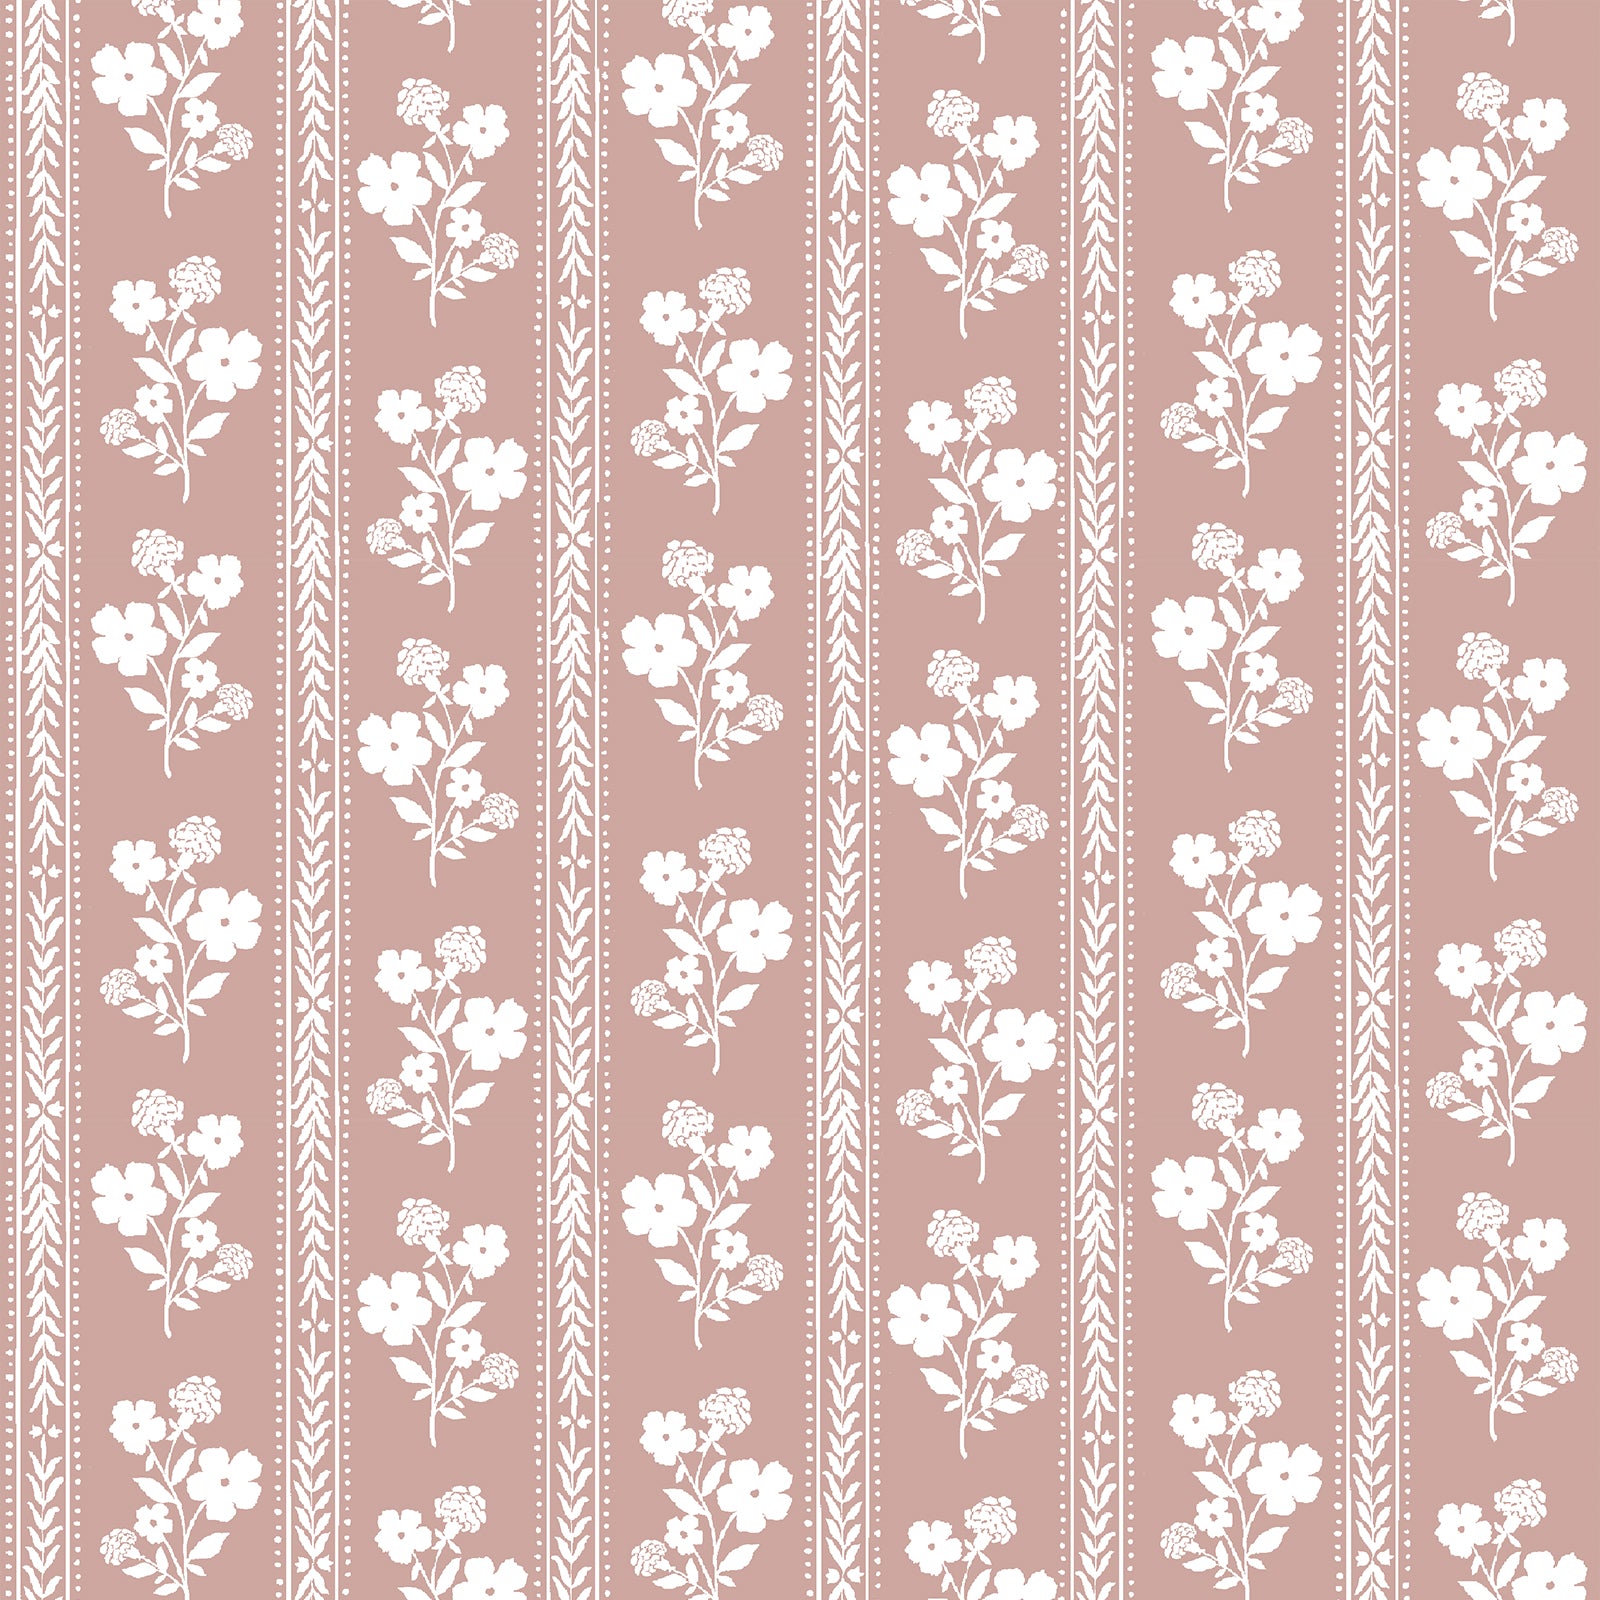 Hollyhock Floral Fabric in Dusty Pink